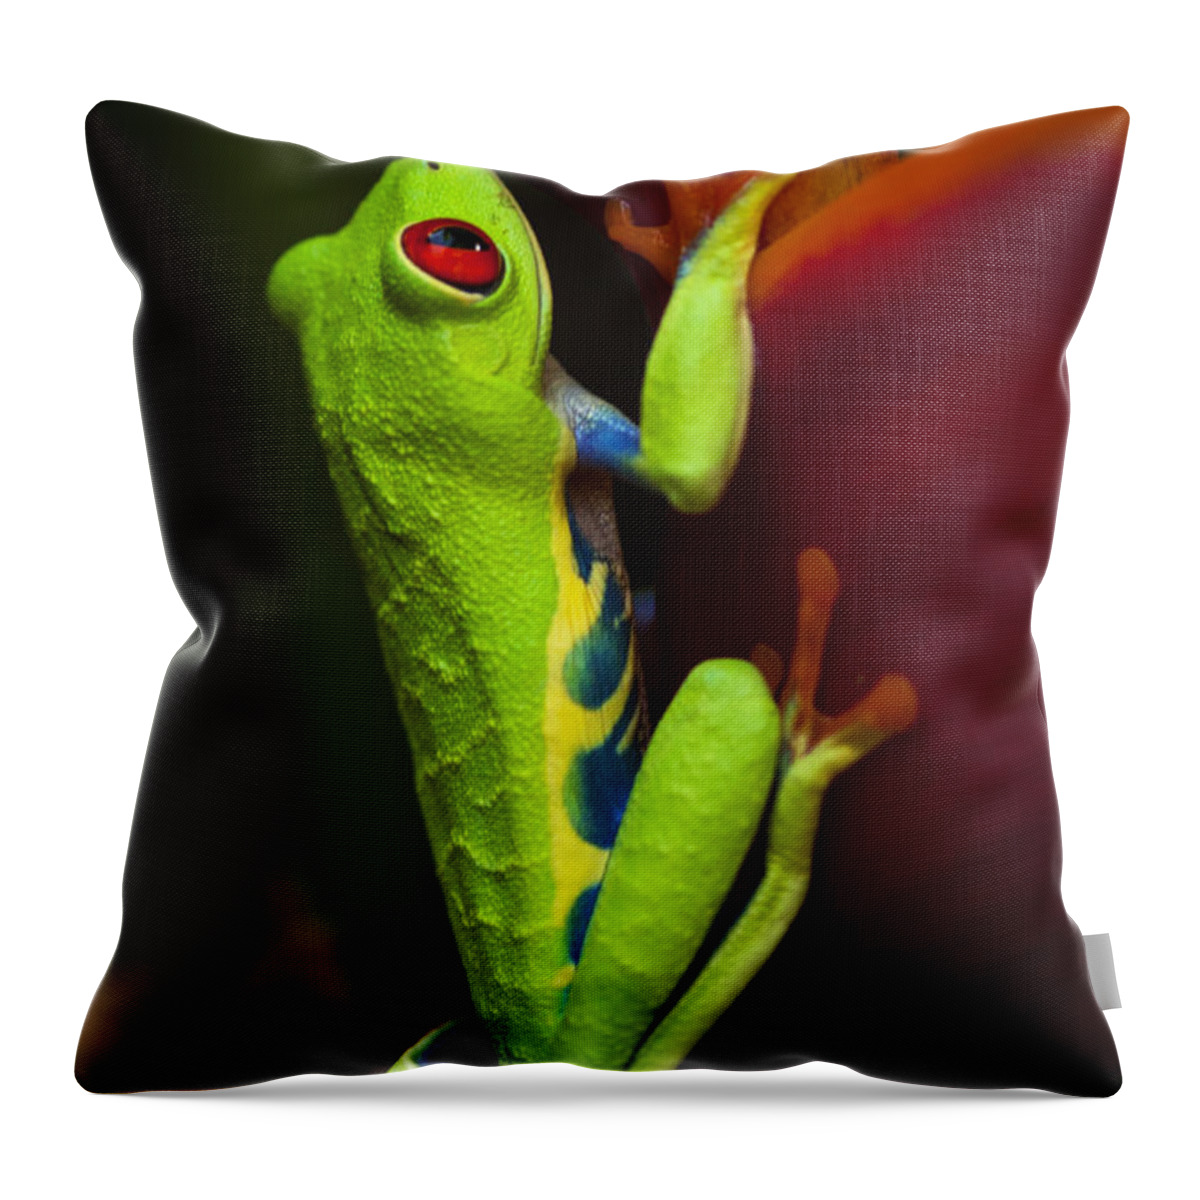 Frog Throw Pillow featuring the photograph Beauty Of Tree Frogs Costa Rica 9 by Bob Christopher